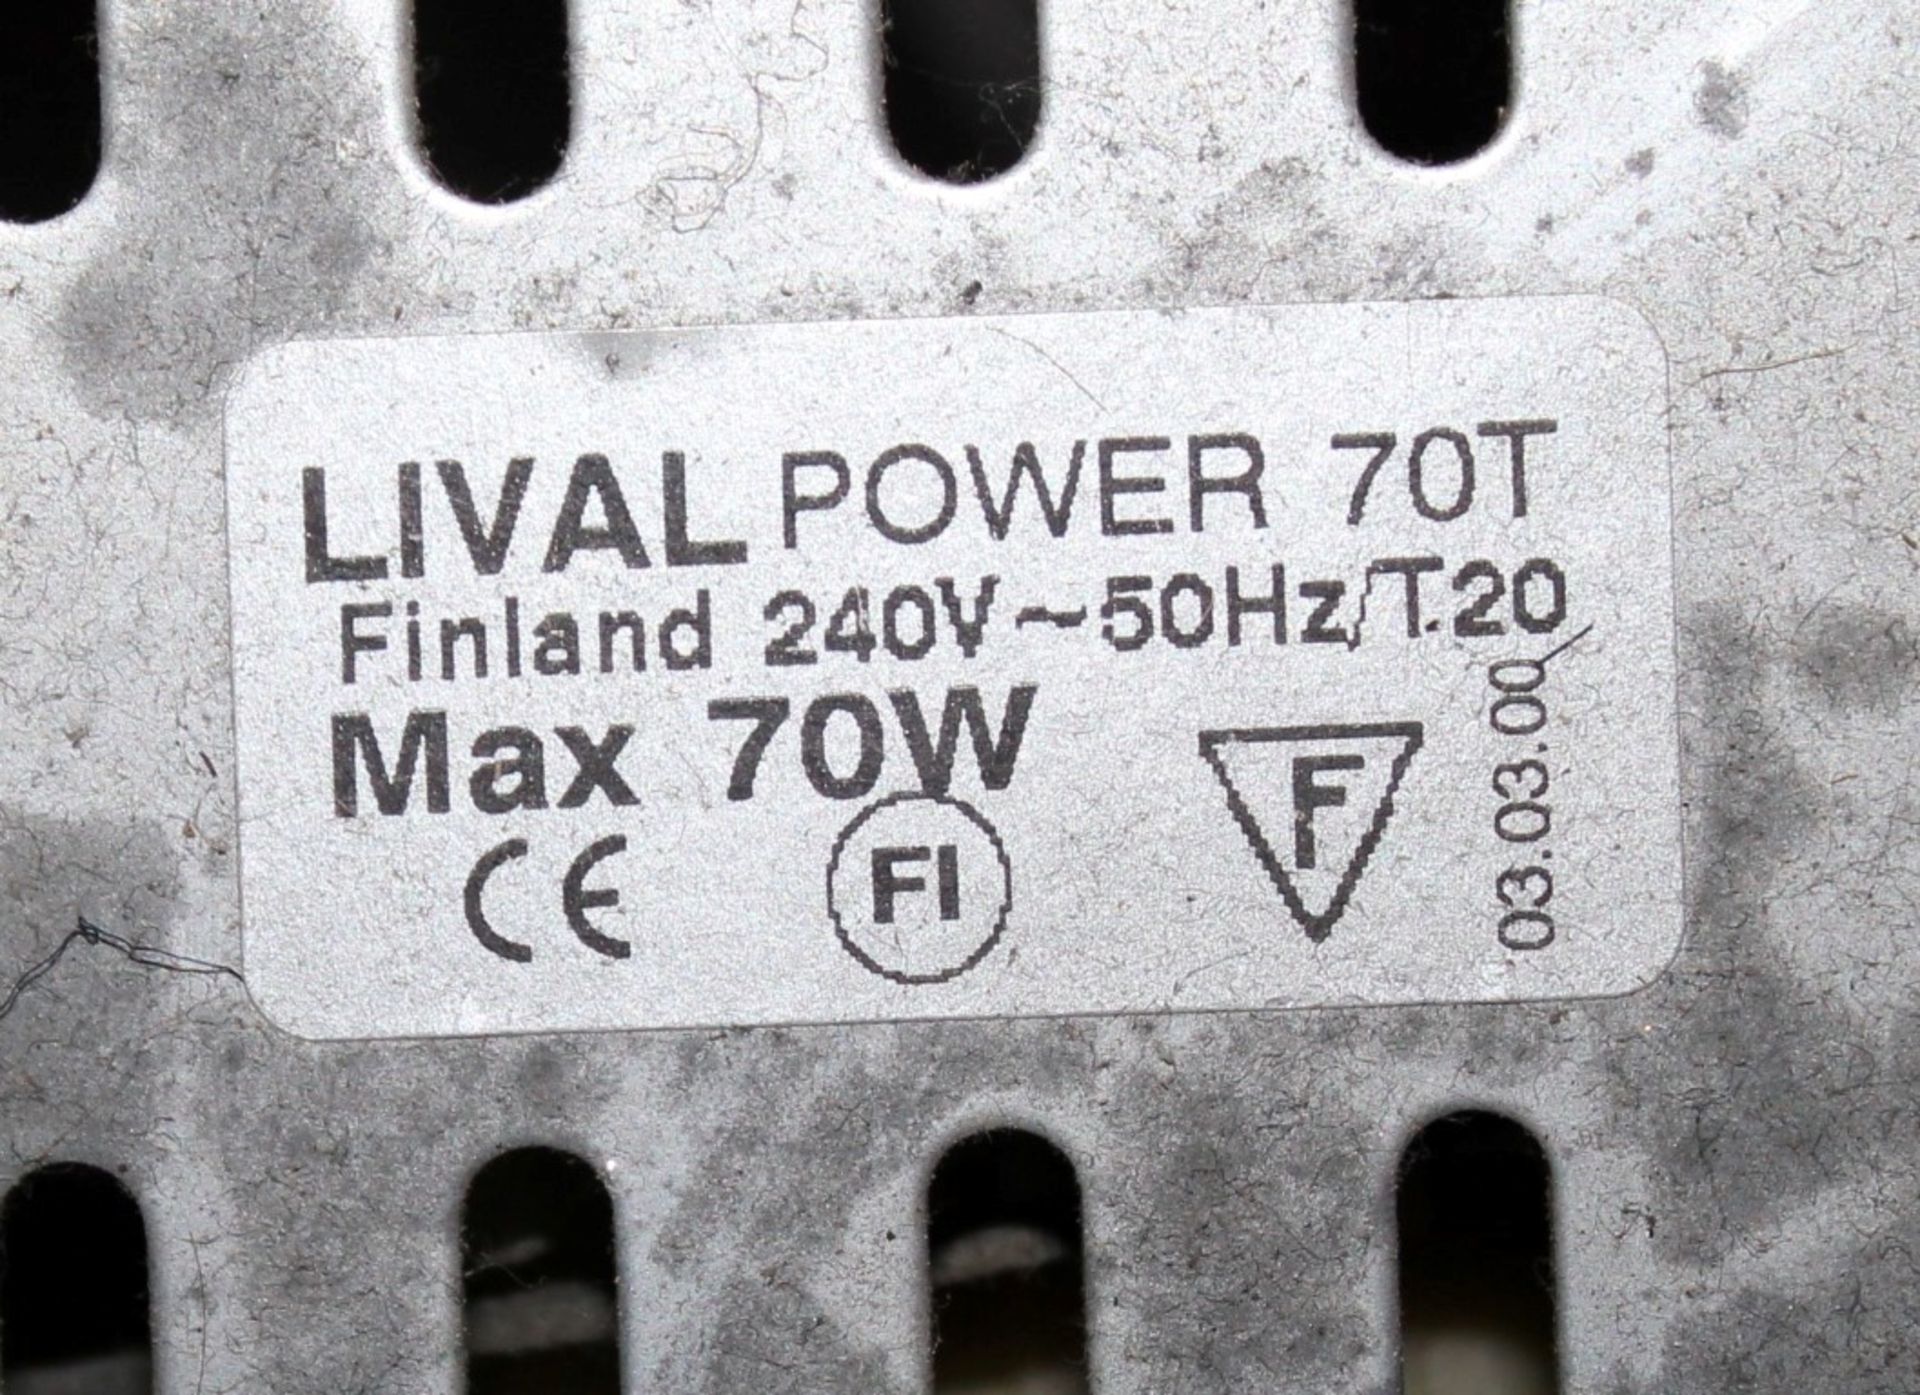 1 x Lival Power 70T 70w Spot Lights - Night Club Disco Stage Lighting - Untested - CL090 - Ref BL183 - Image 2 of 3